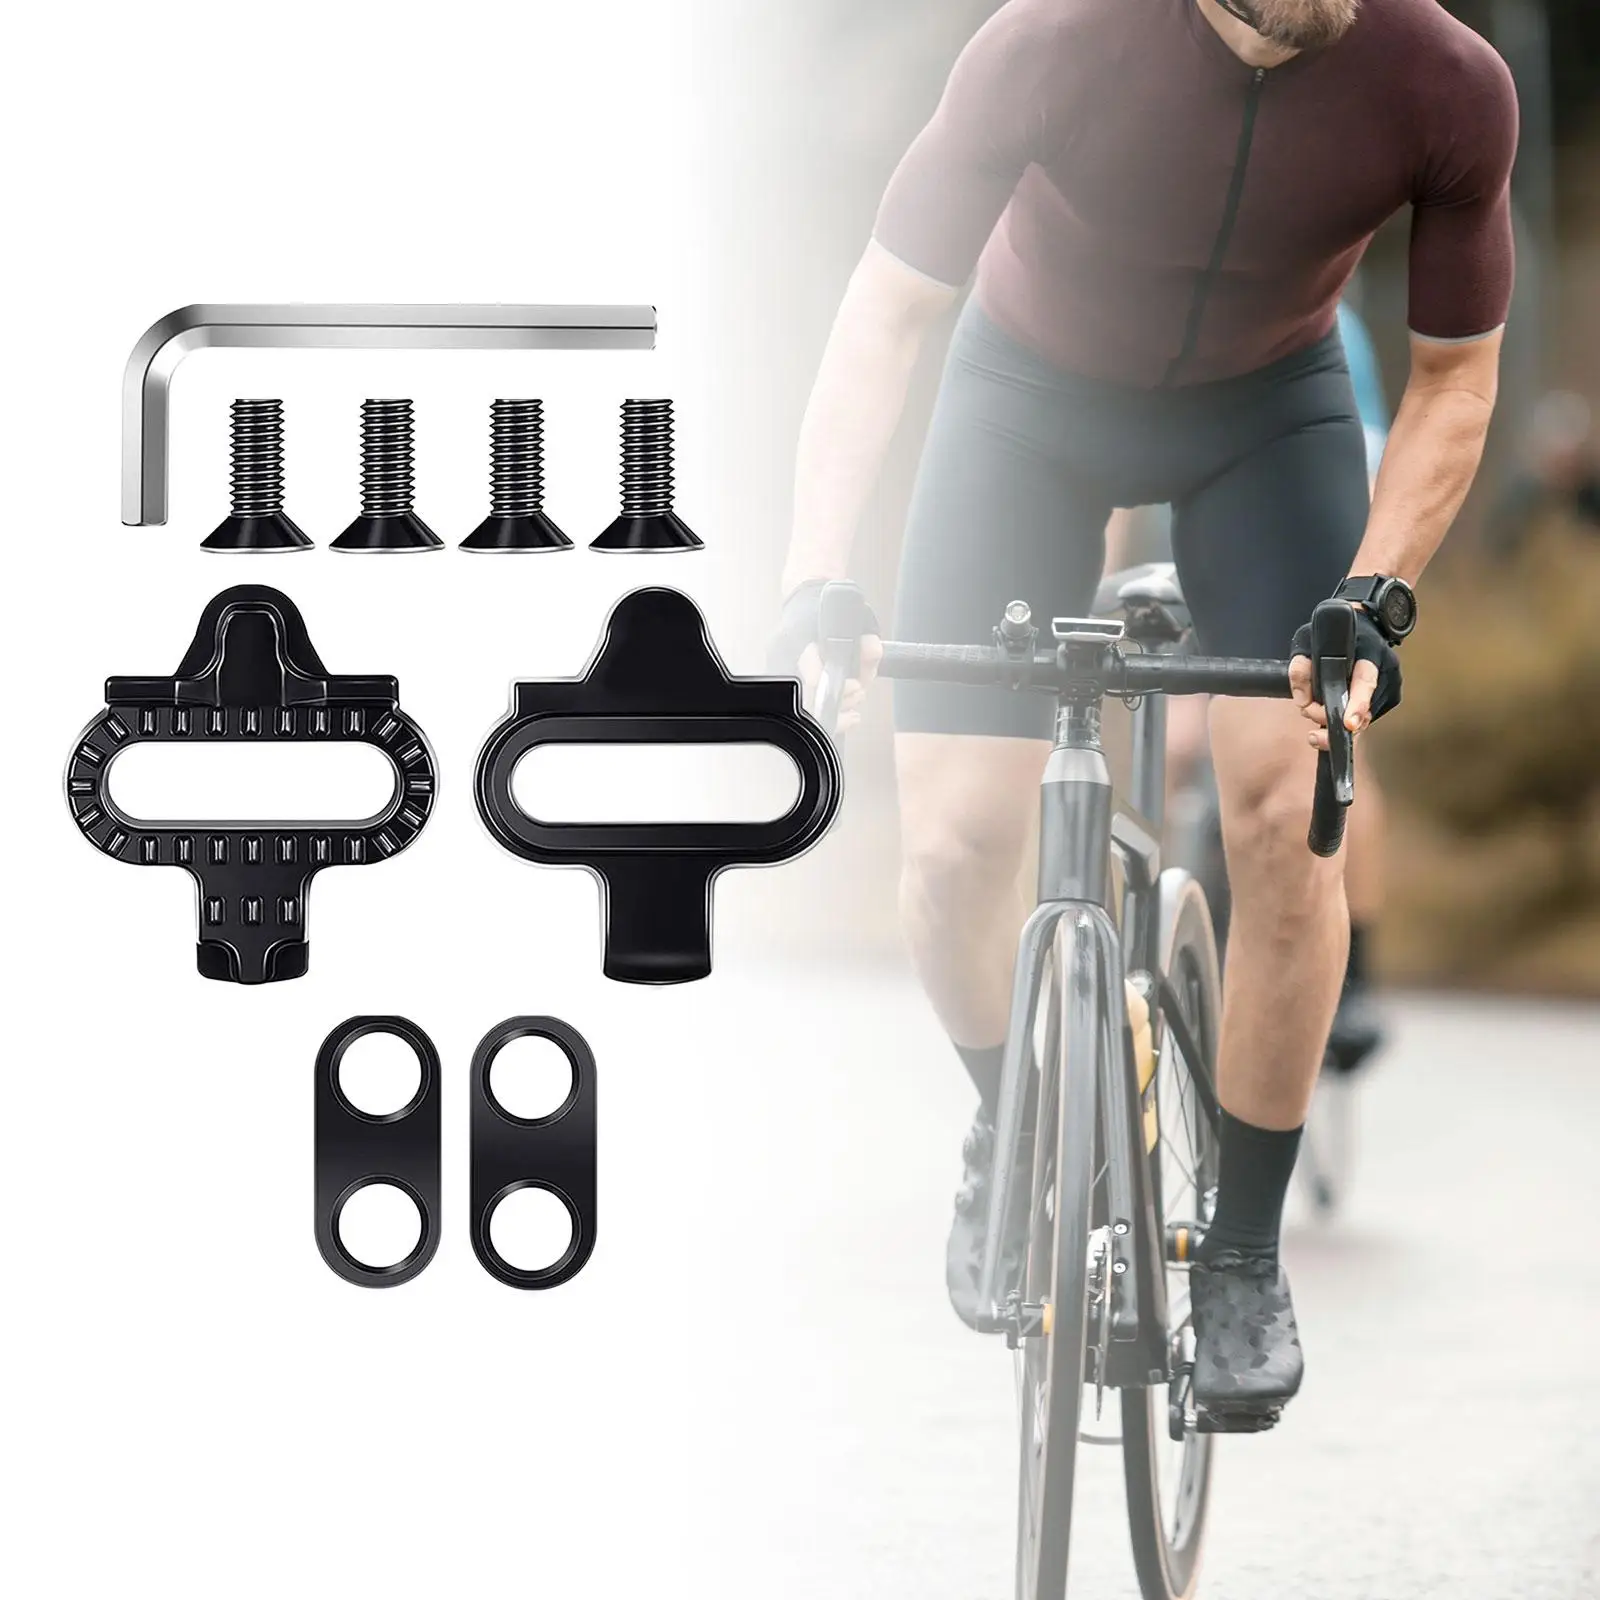 Pedal Lock Riding Shoes Splint Set Cycling Parts Mountain Bikes Professional Durable Practical Bicycle Pedals Cleats Kit